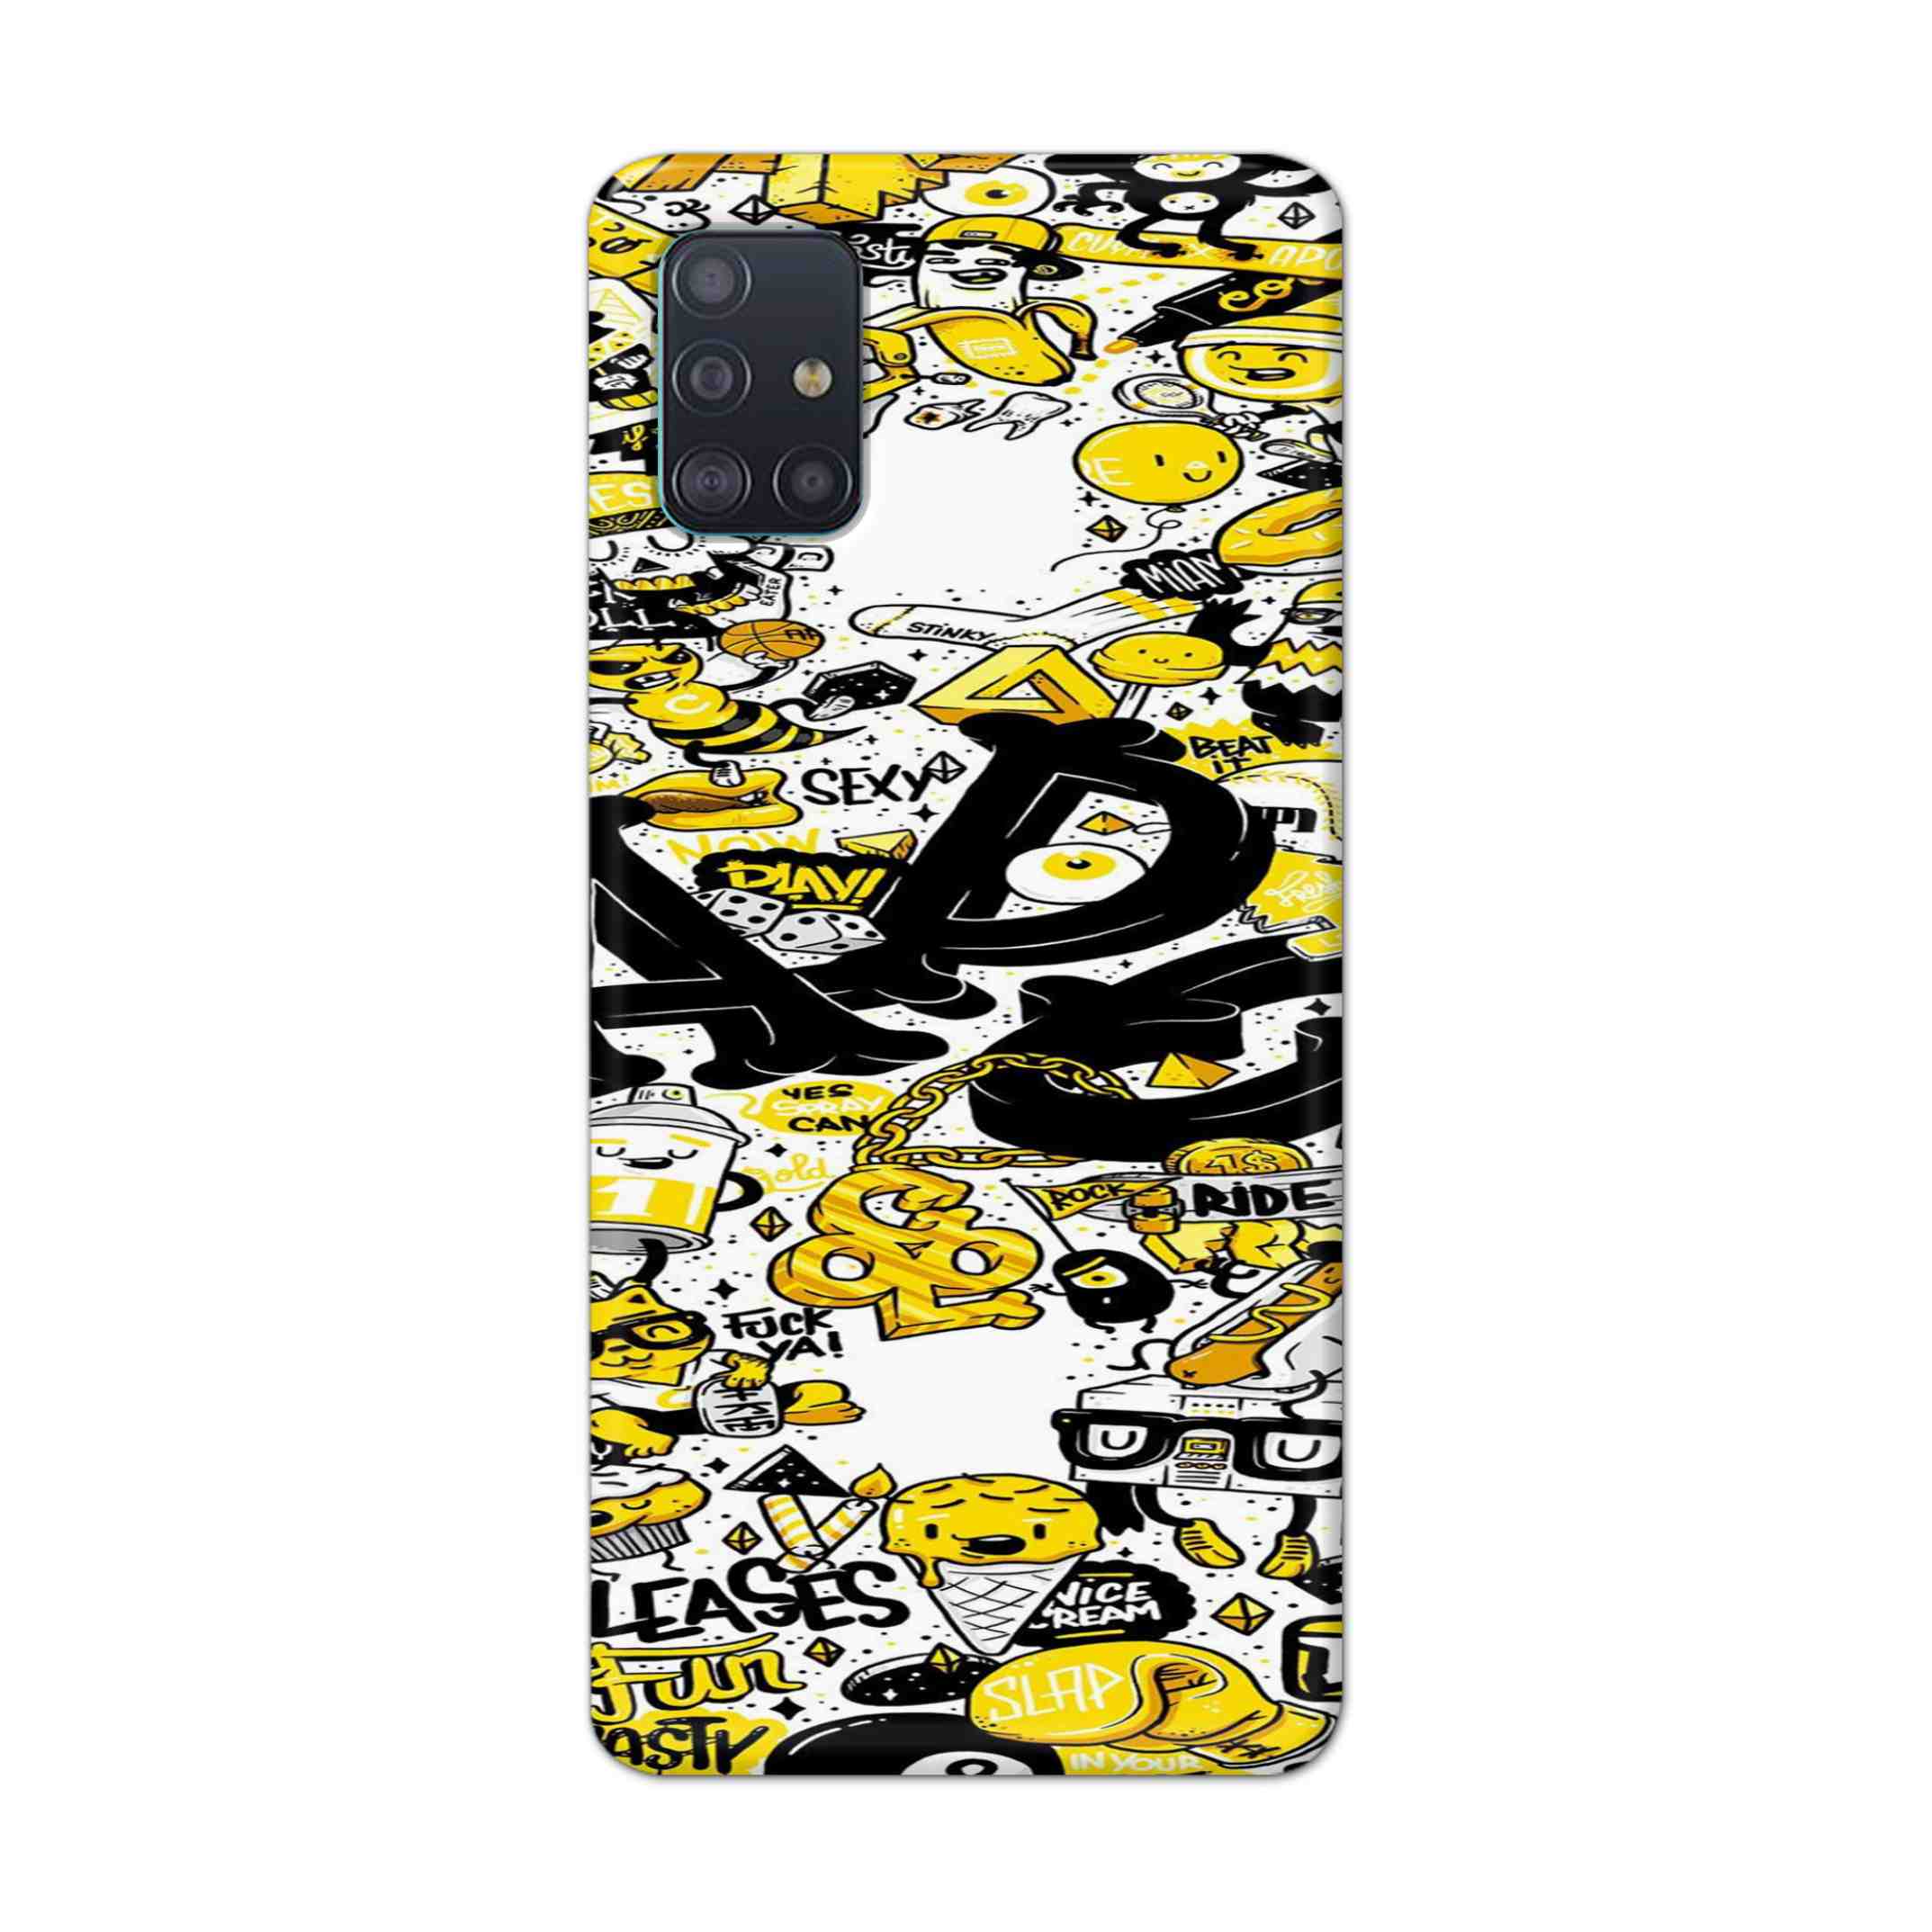 Buy Ado Hard Back Mobile Phone Case Cover For Samsung Galaxy A71 Online